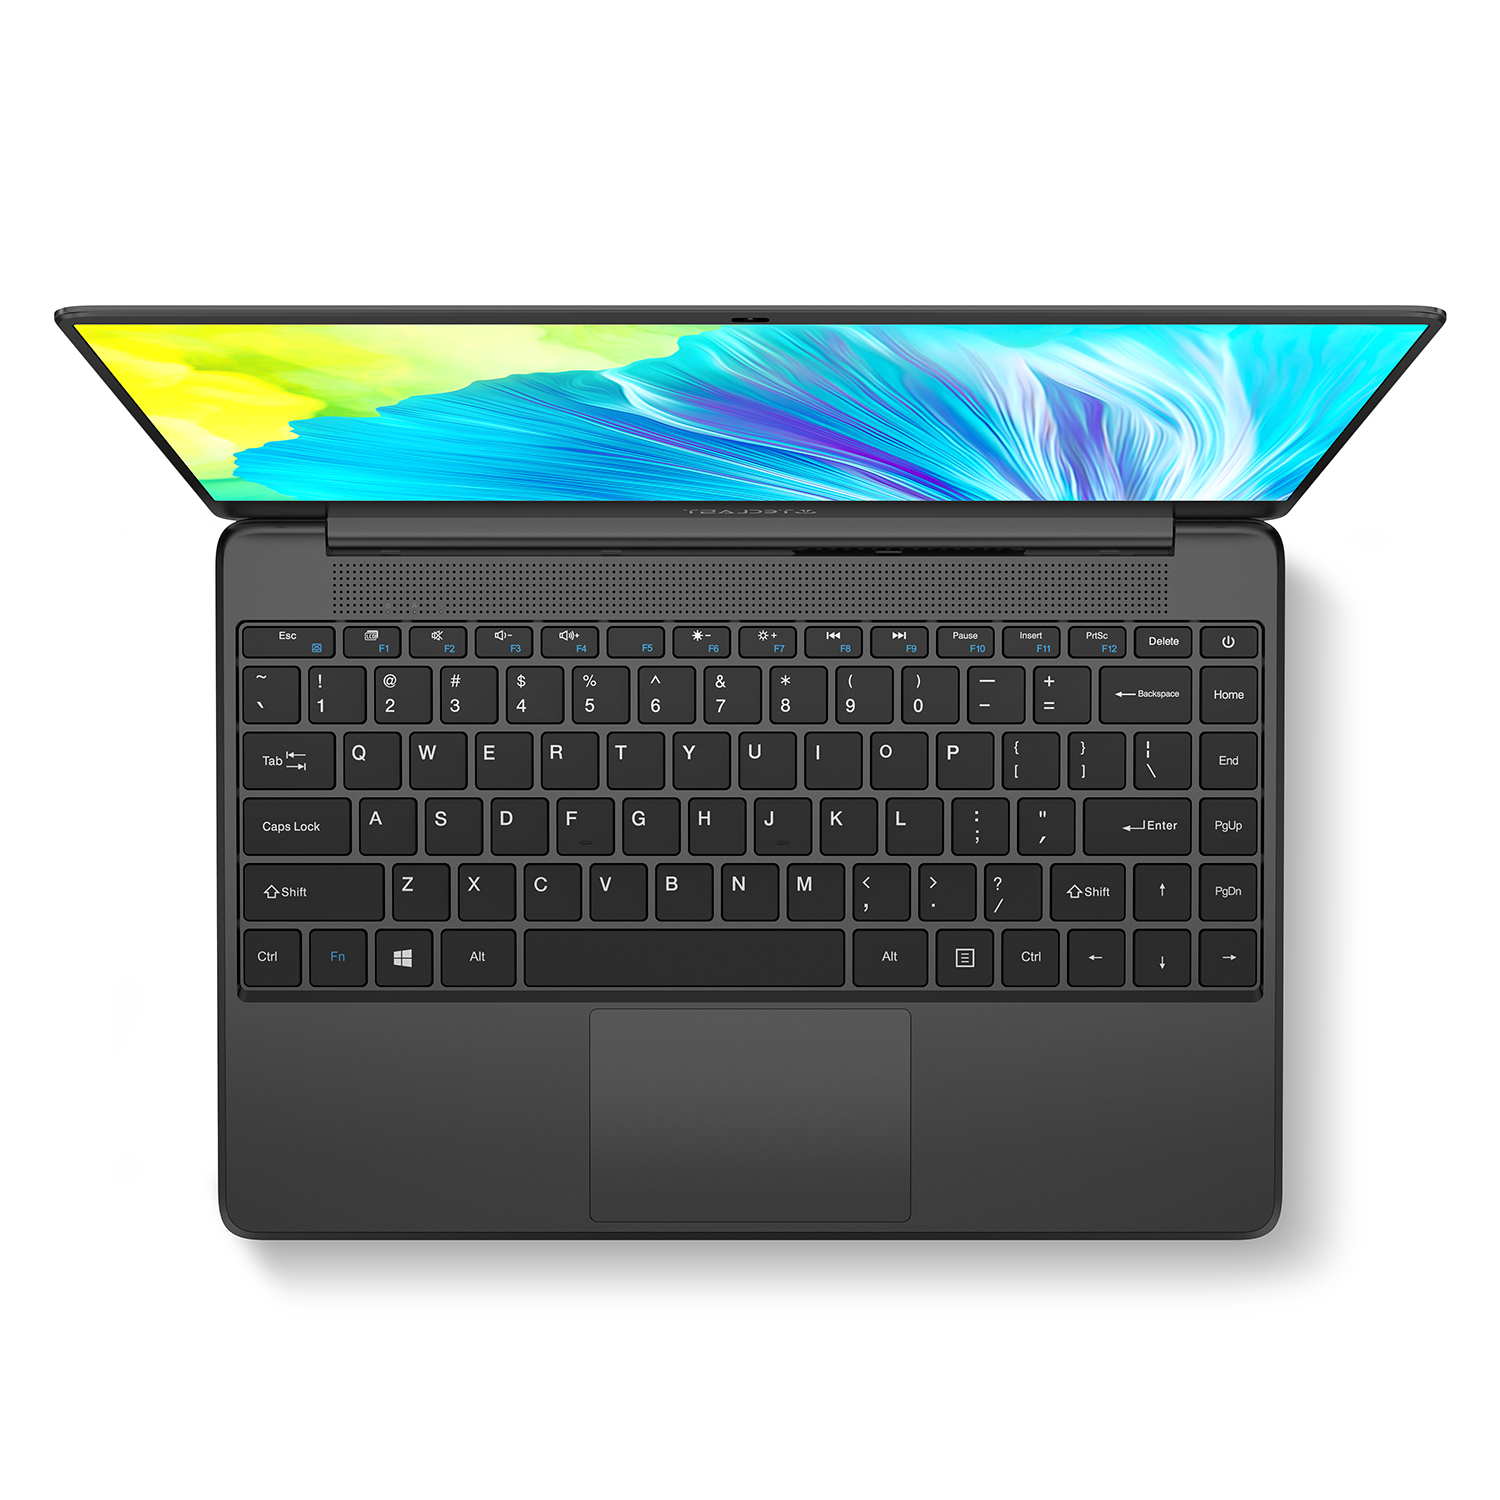 Find [EU Direct]Teclast F7 Plus â…¢ Laptop 14.1 inch Intel N4120 Quad-Core 2.6GHz 8GB LPDDR4  RAM 256GB SSD 46W Large Battery Full Metal Cases Notebook for Sale on Gipsybee.com with cryptocurrencies